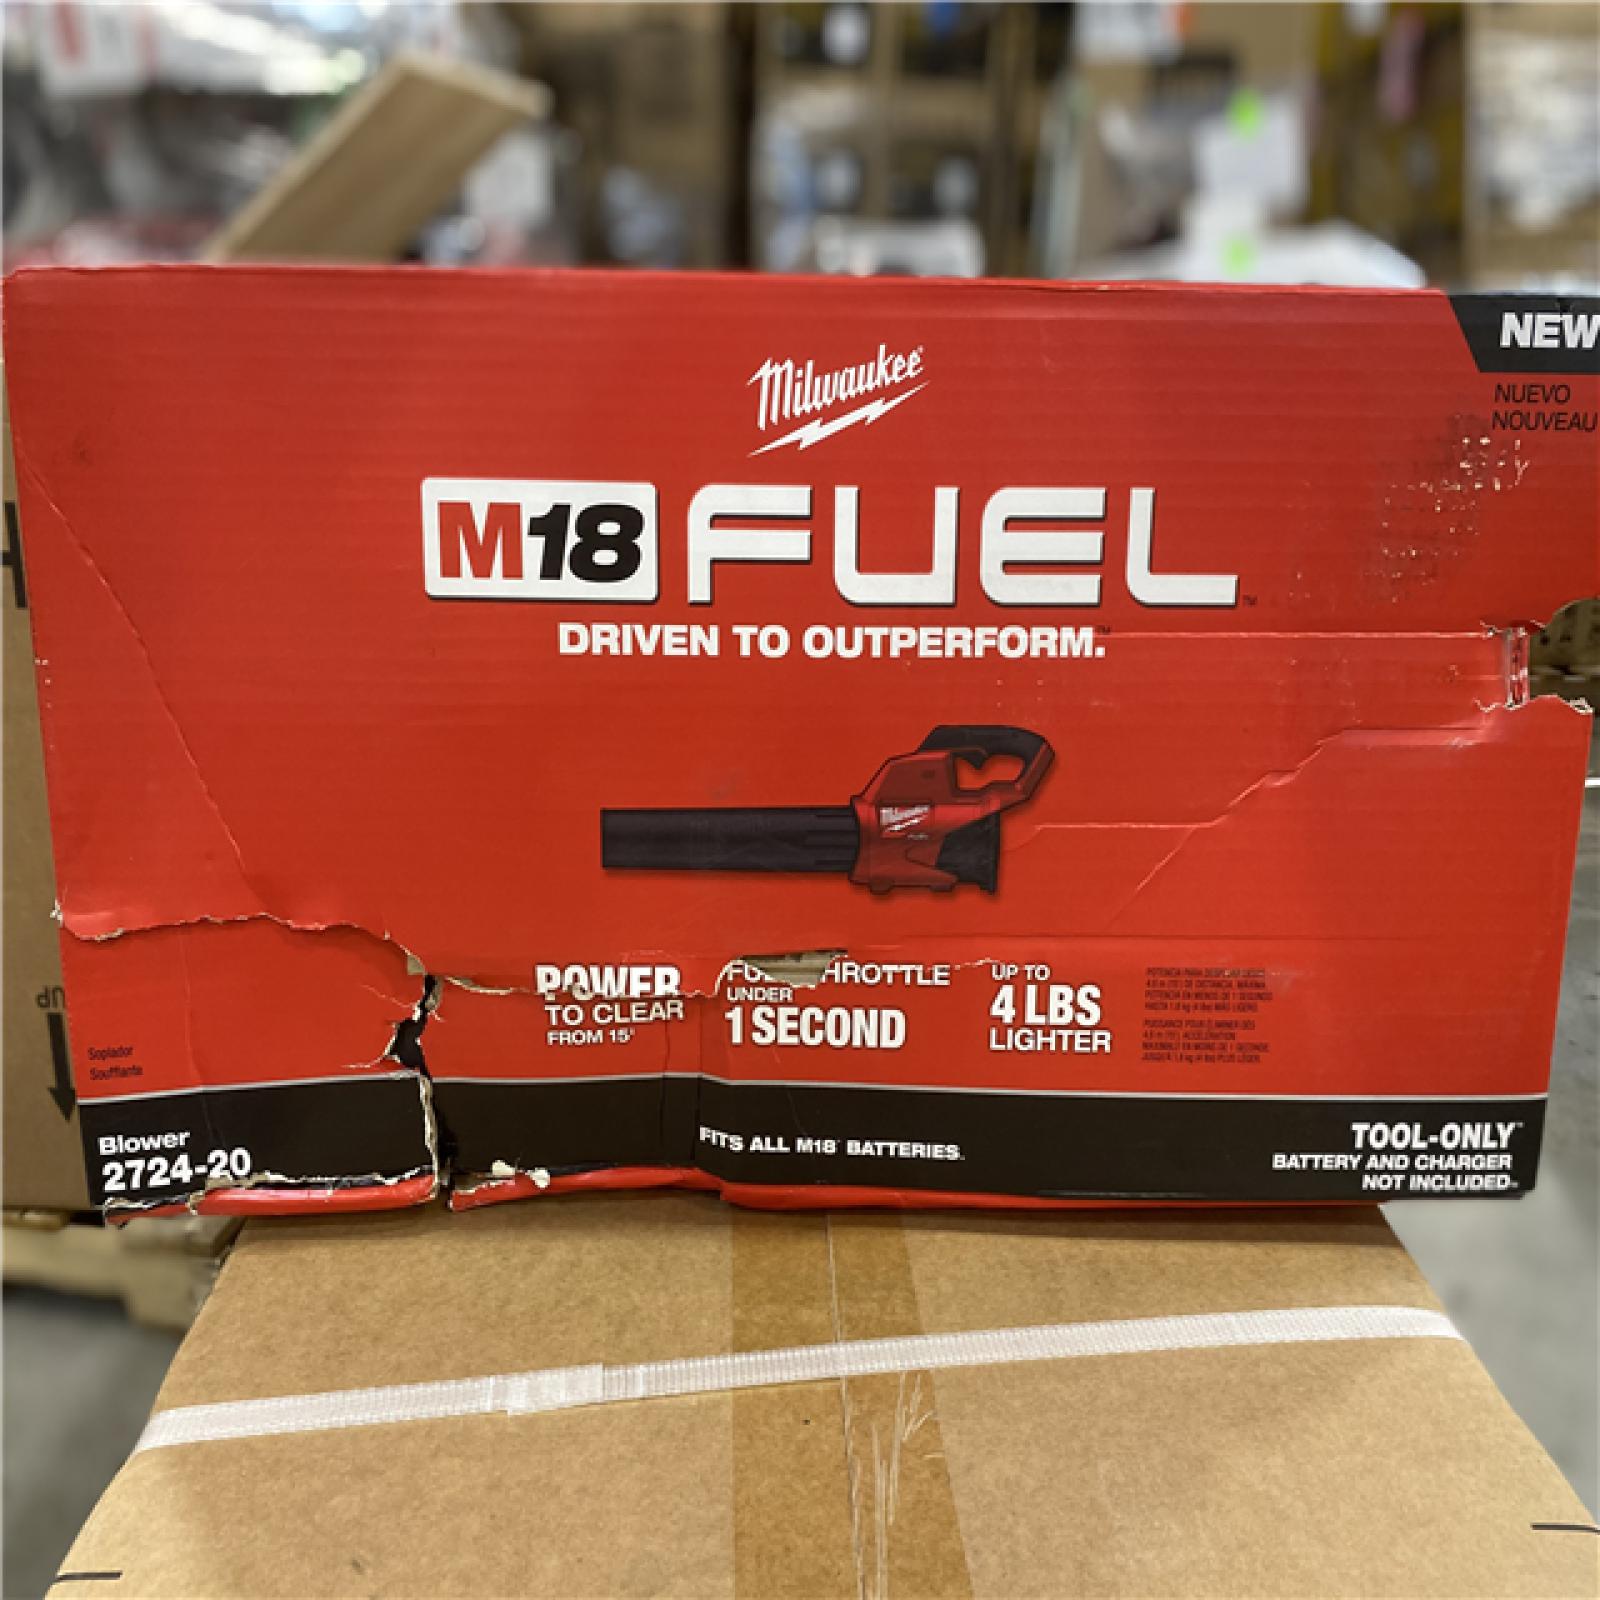 NEW! - Milwaukee M18 FUEL 120 MPH 450 CFM 18V Lithium-Ion Brushless Cordless Handheld Blower (Tool-Only)